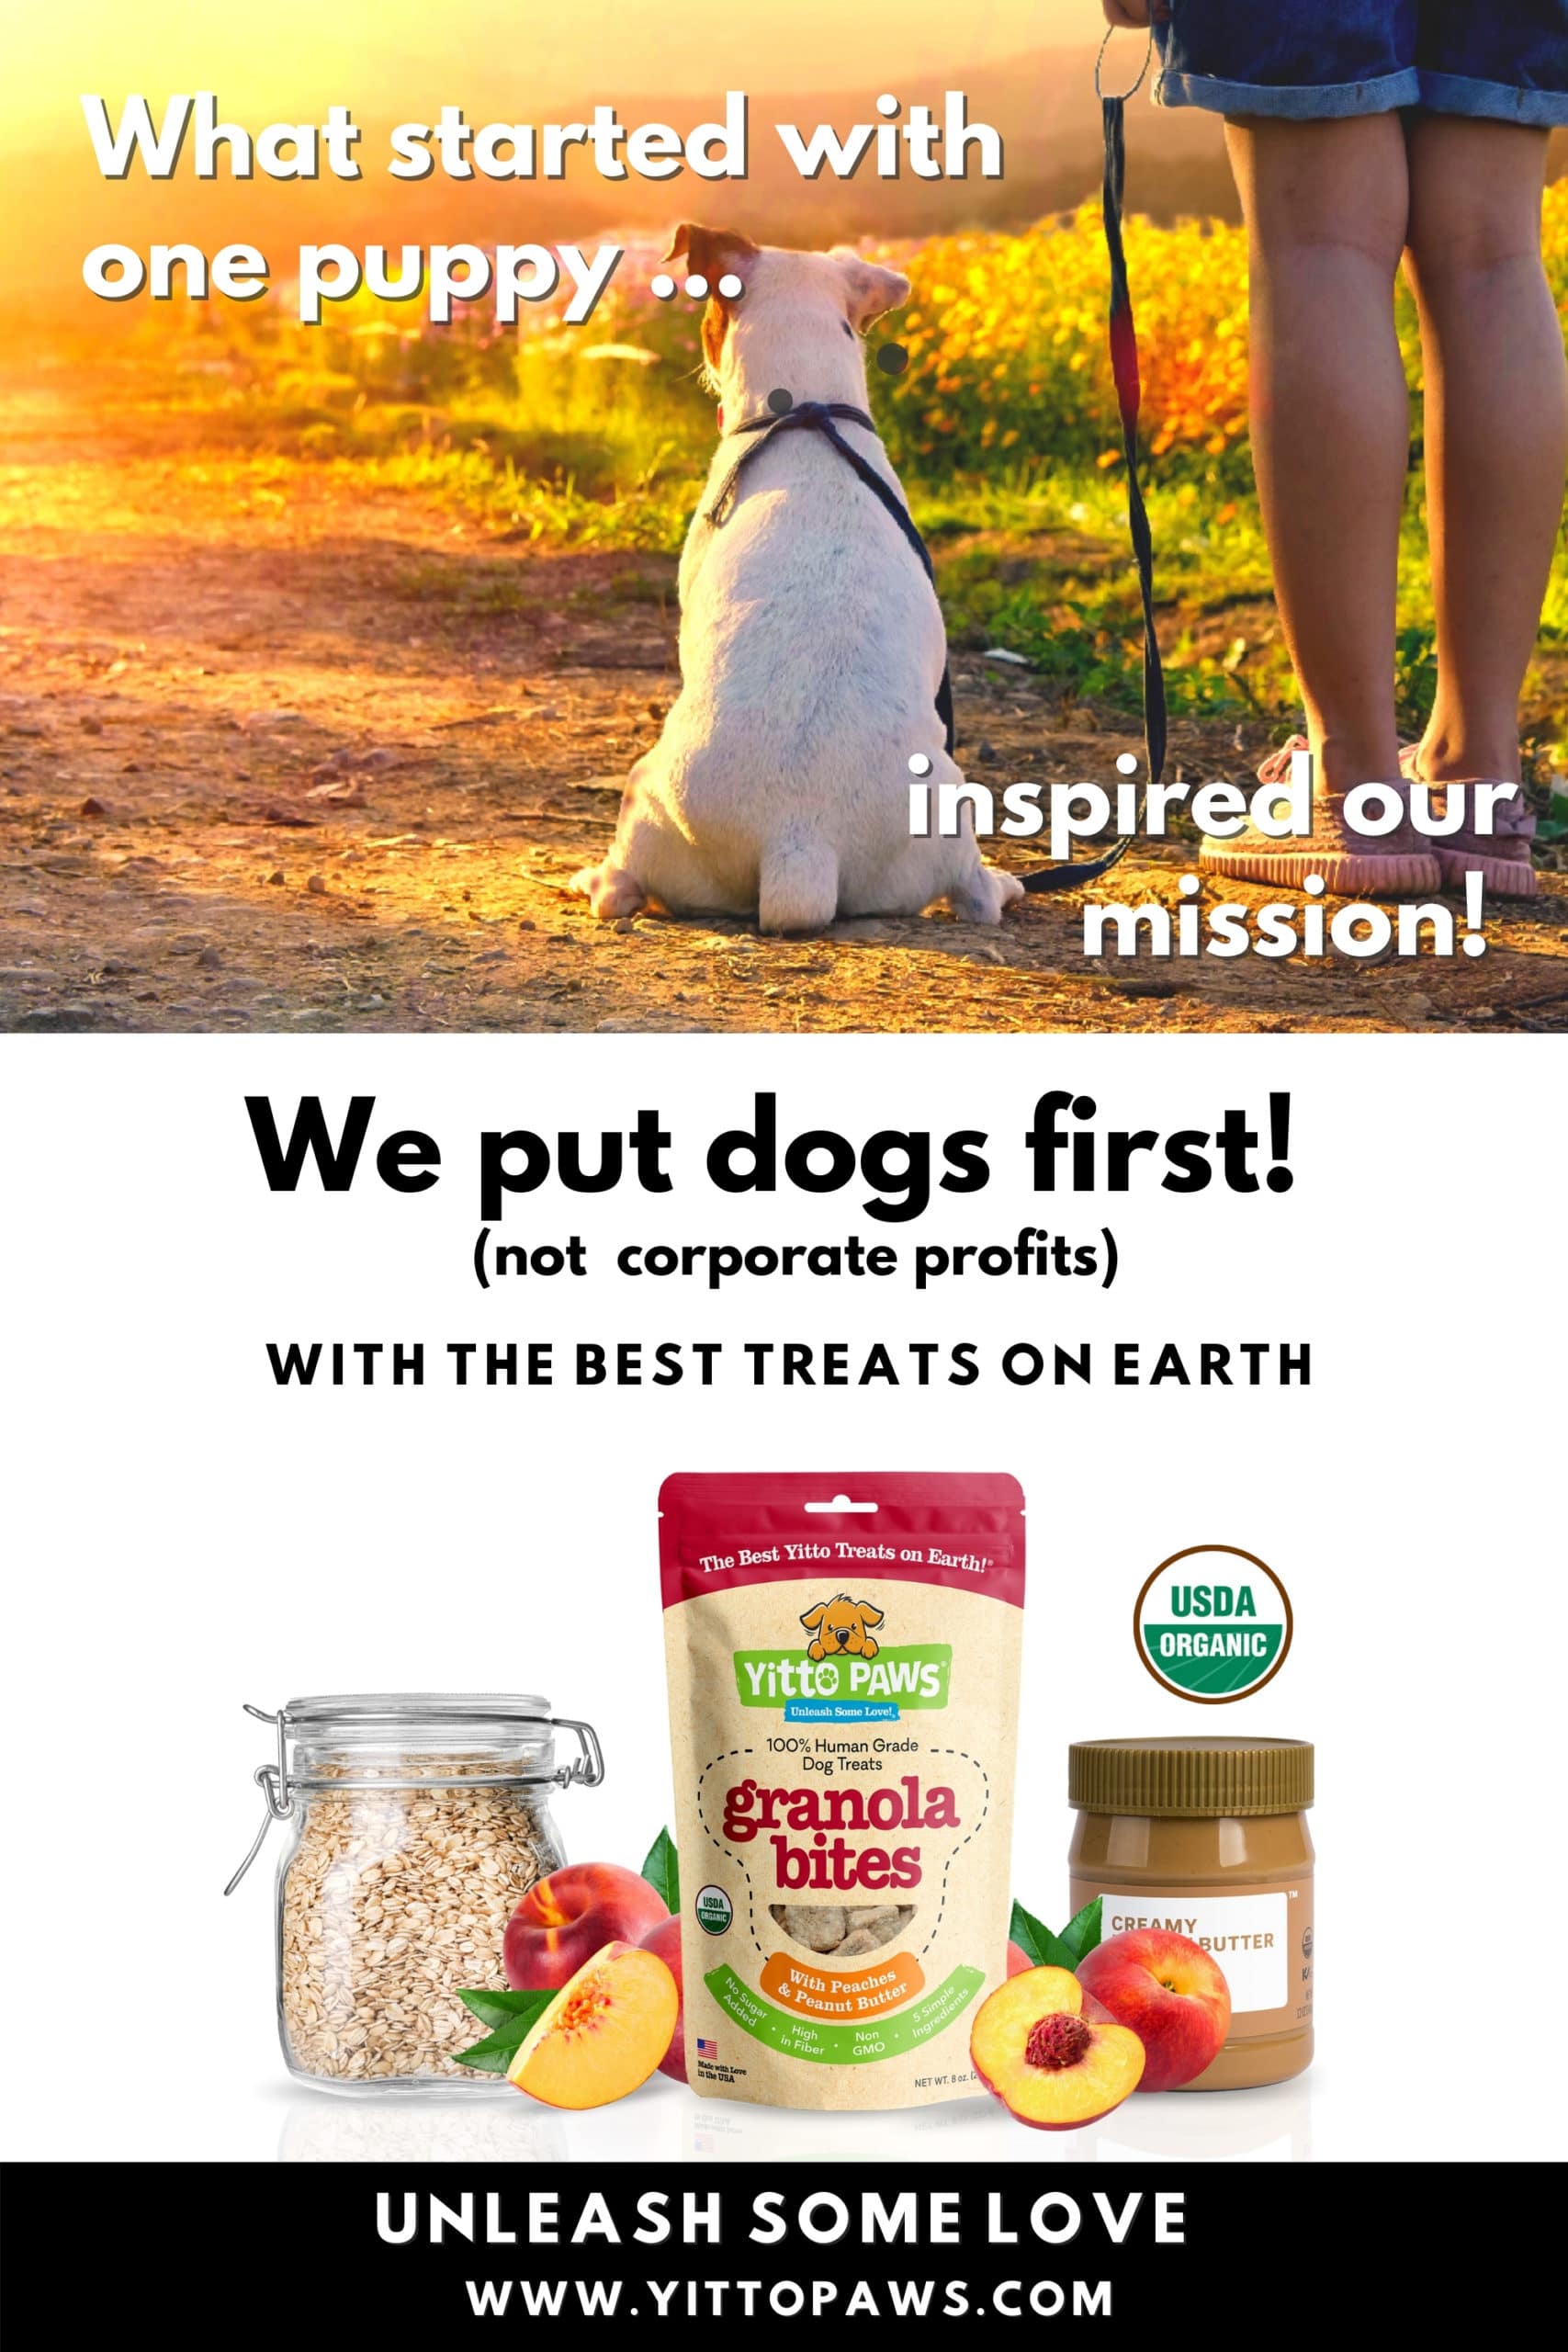 Putting Dogs First means prioritizing the health and happiness of our dogs over corporate profits.